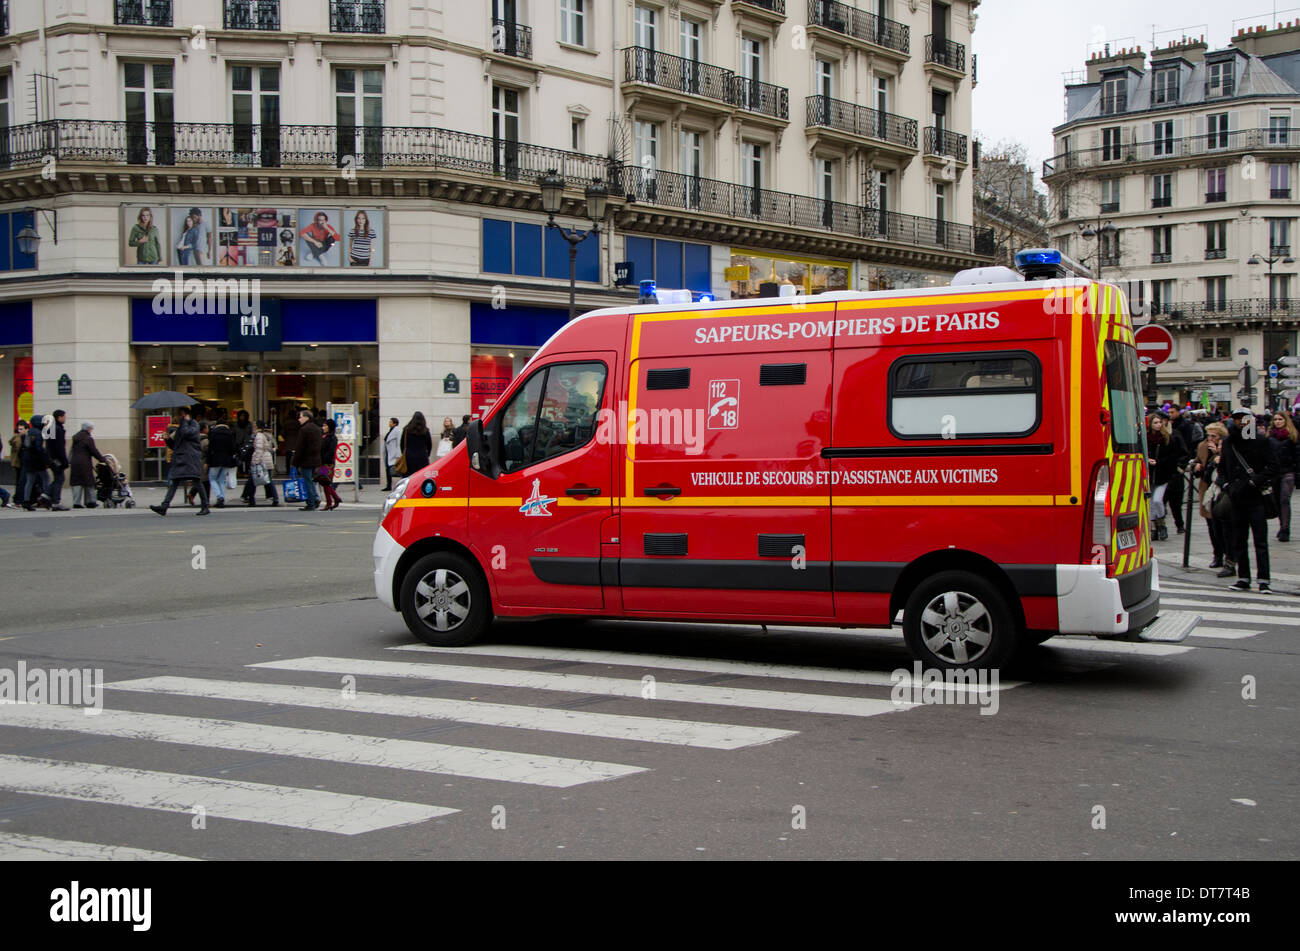 Ambulance van of the fire brigade in the streets of Paris, France. Stock Photo